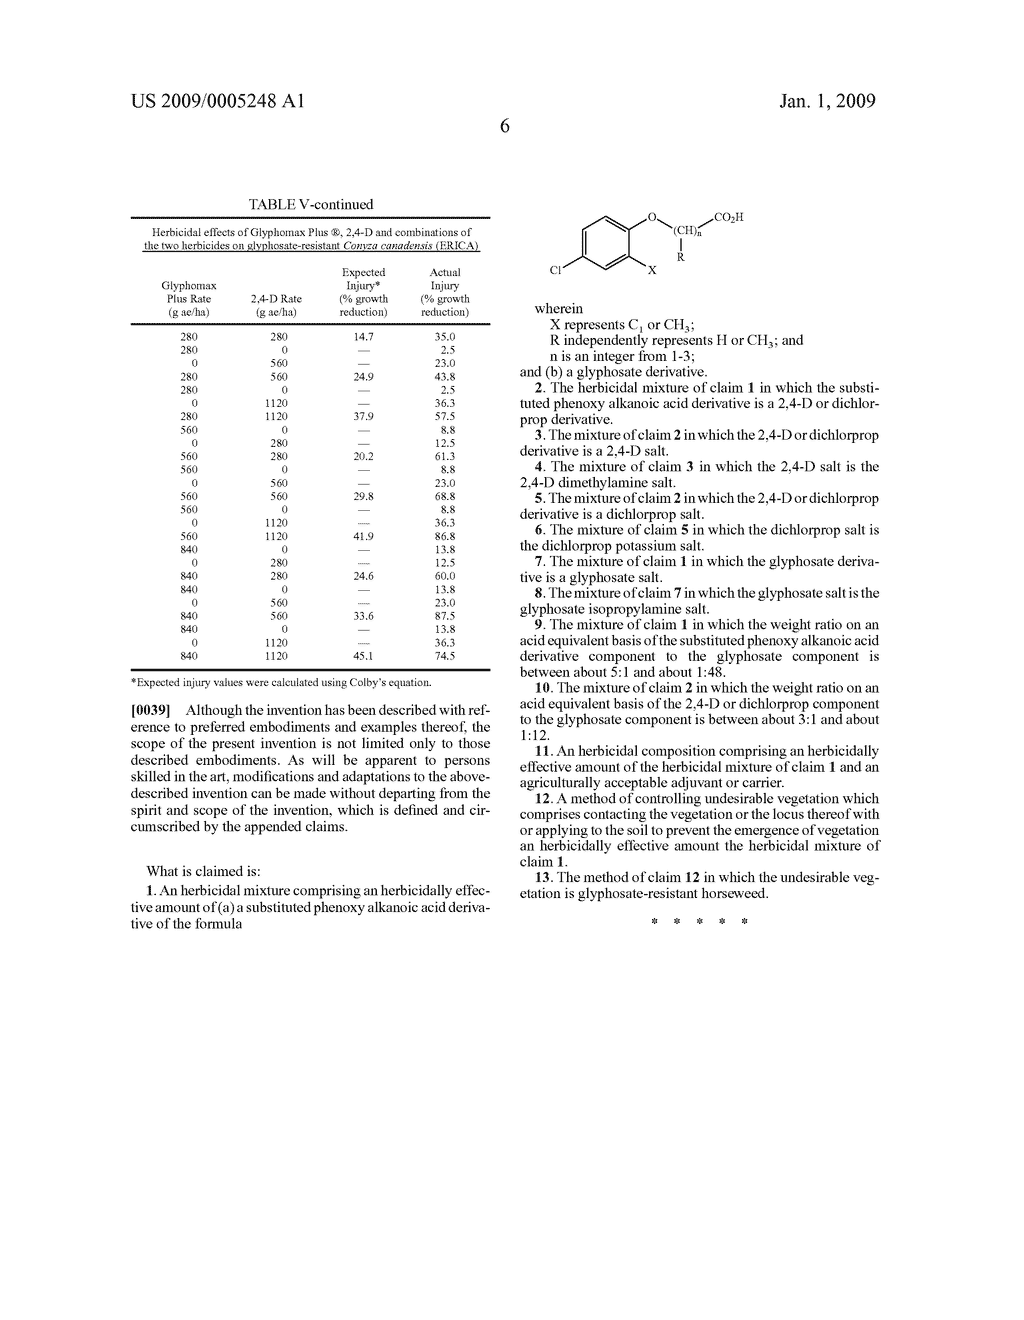 SYNERGISTIC HERBICIDAL COMPOSITION CONTAINING A SUBSTITUTED PHENOXY ALKANOIC ACID DERIVATIVE AND A GLYPHOSATE DERIVATIVE - diagram, schematic, and image 07